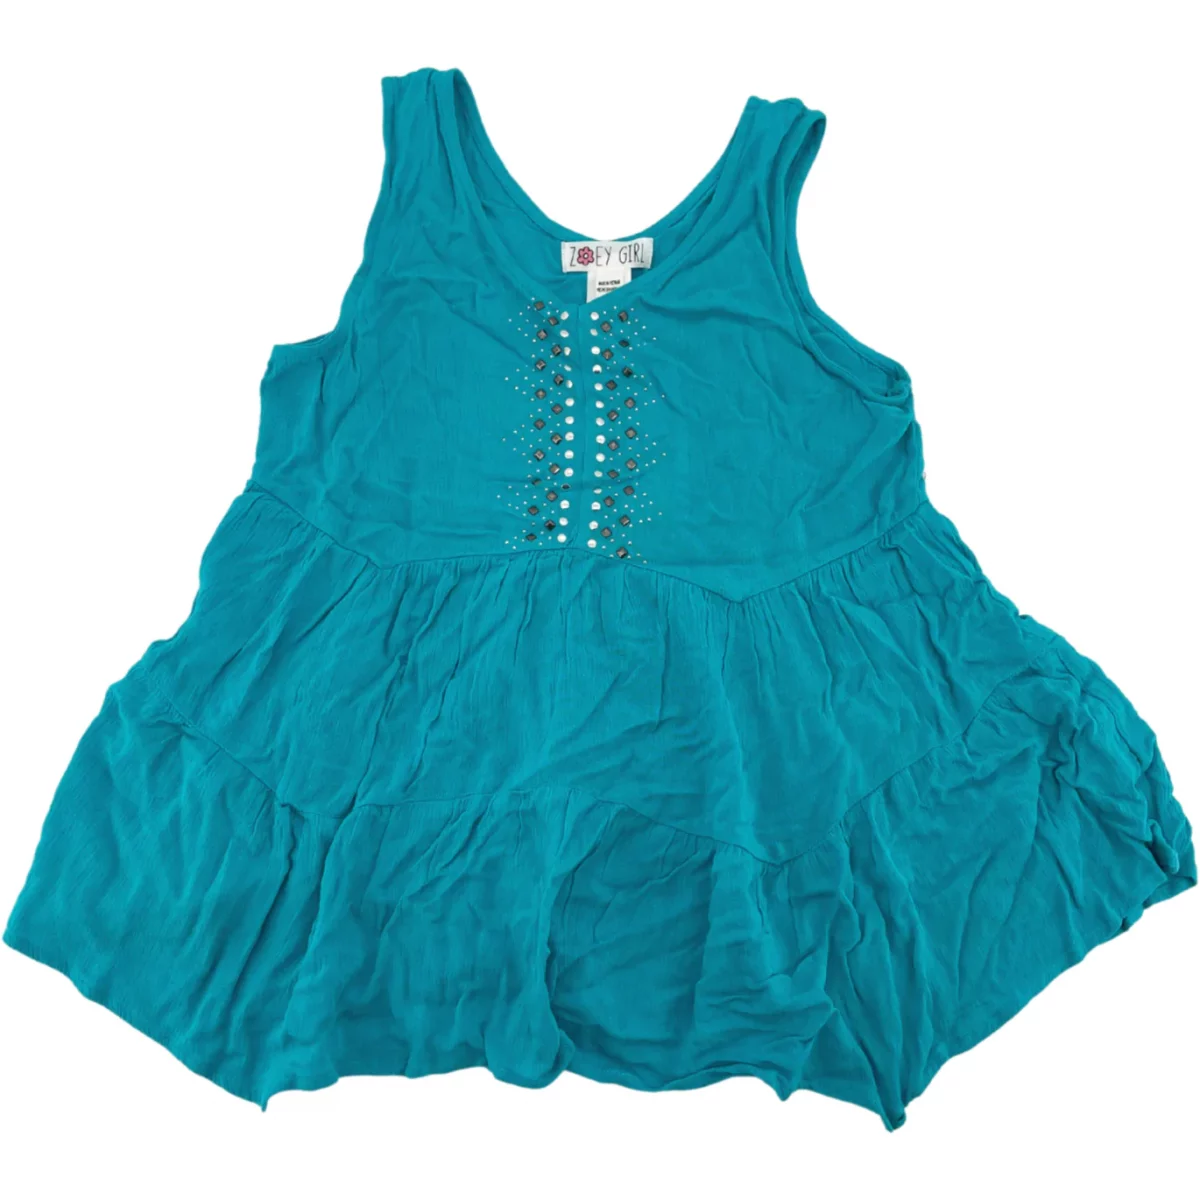 Zoey Girl Girl's Tank Top / Blue / Size Large